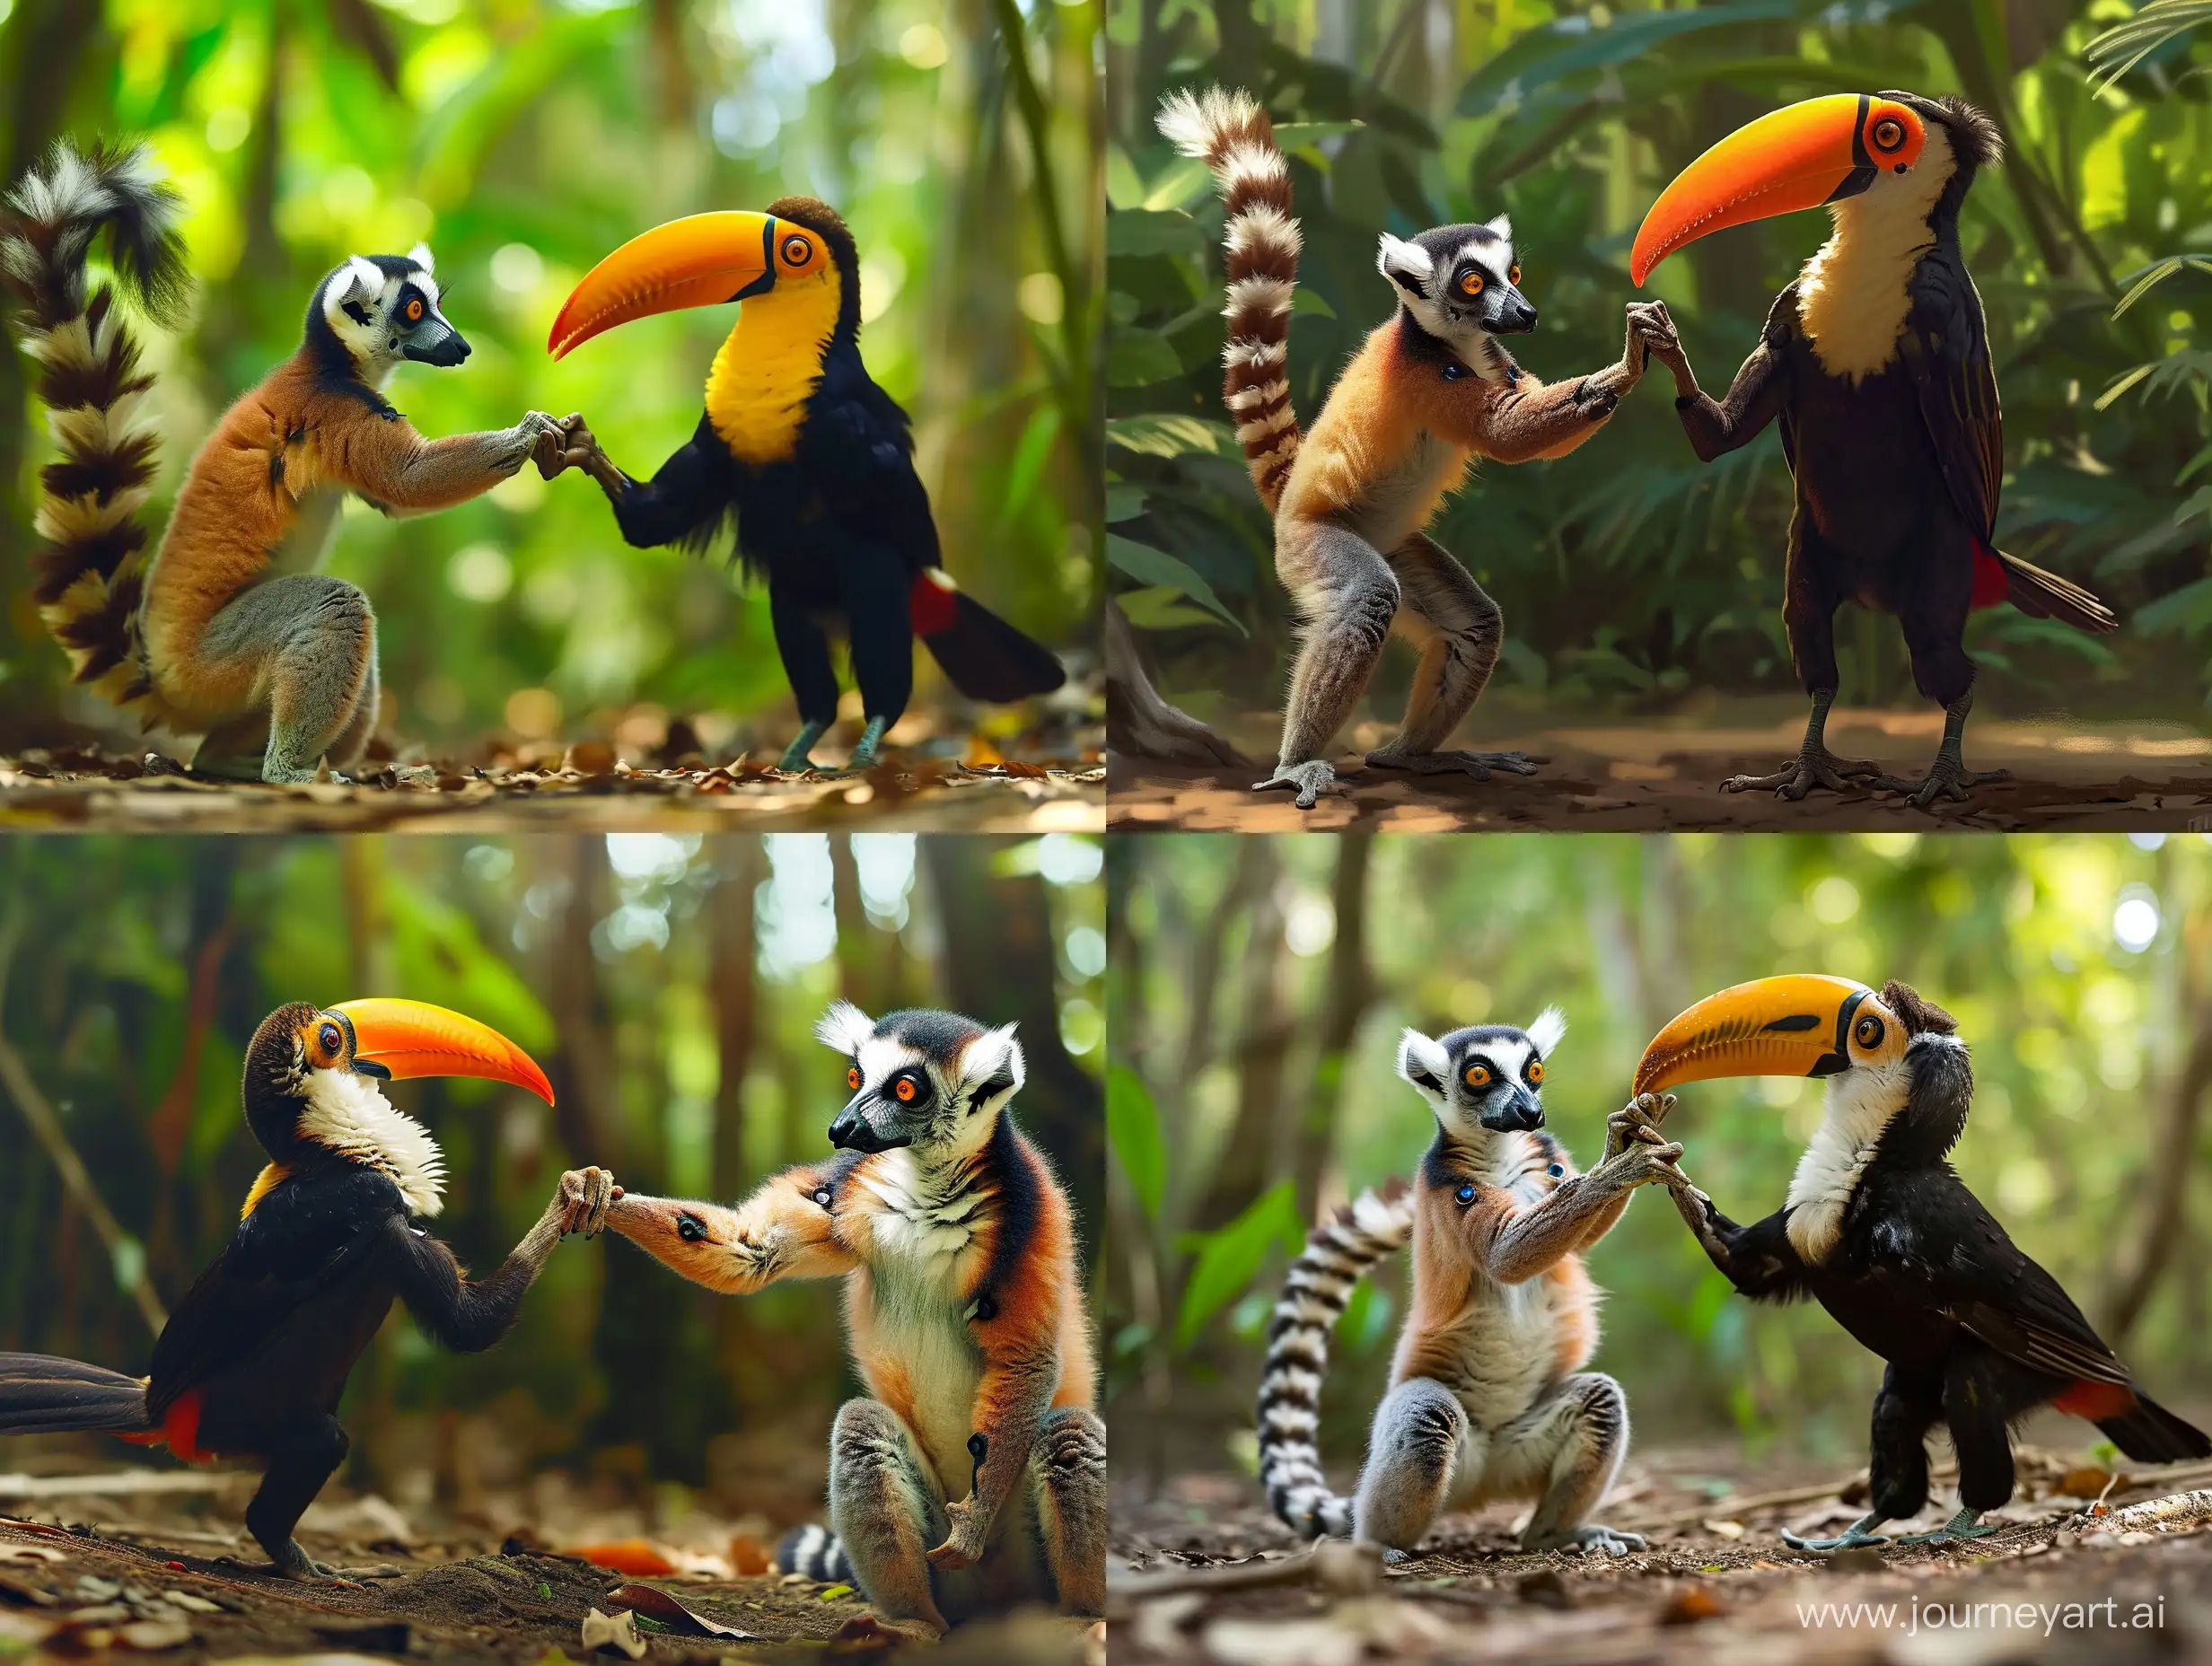 Toucan-and-Lemur-Companionship-in-Lush-Forest-Setting